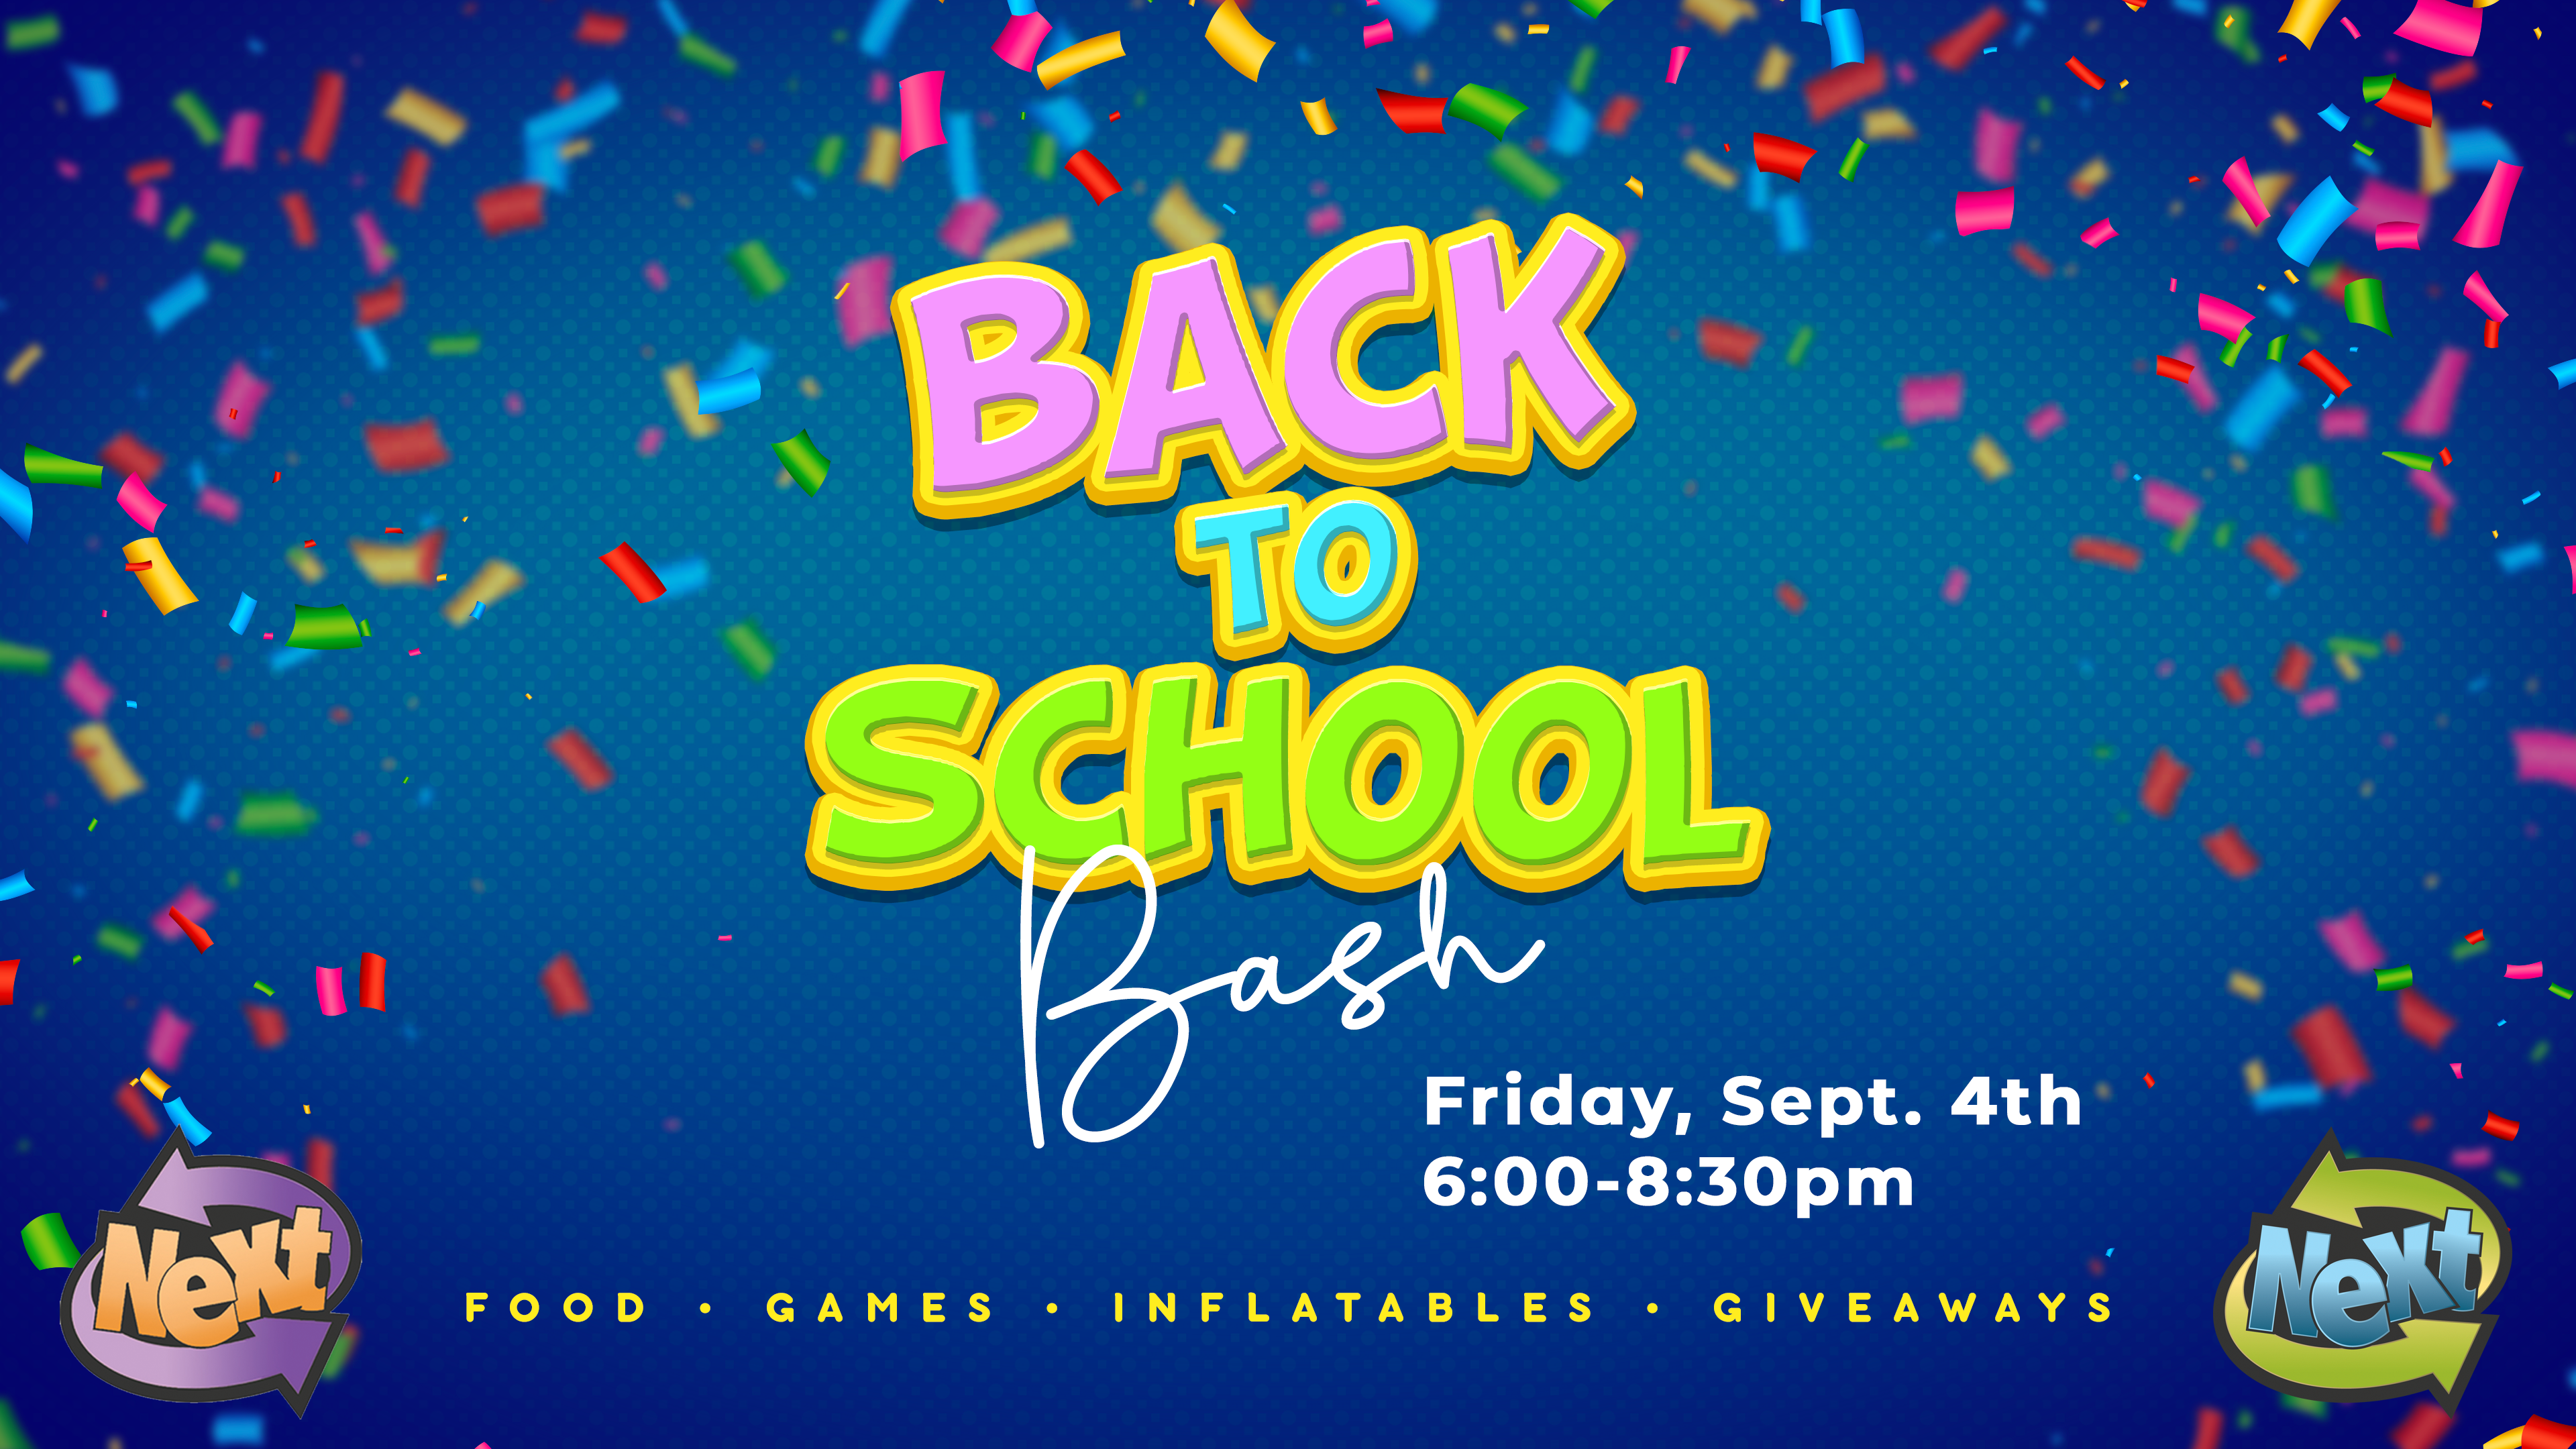 Back To School Bash Graphic image